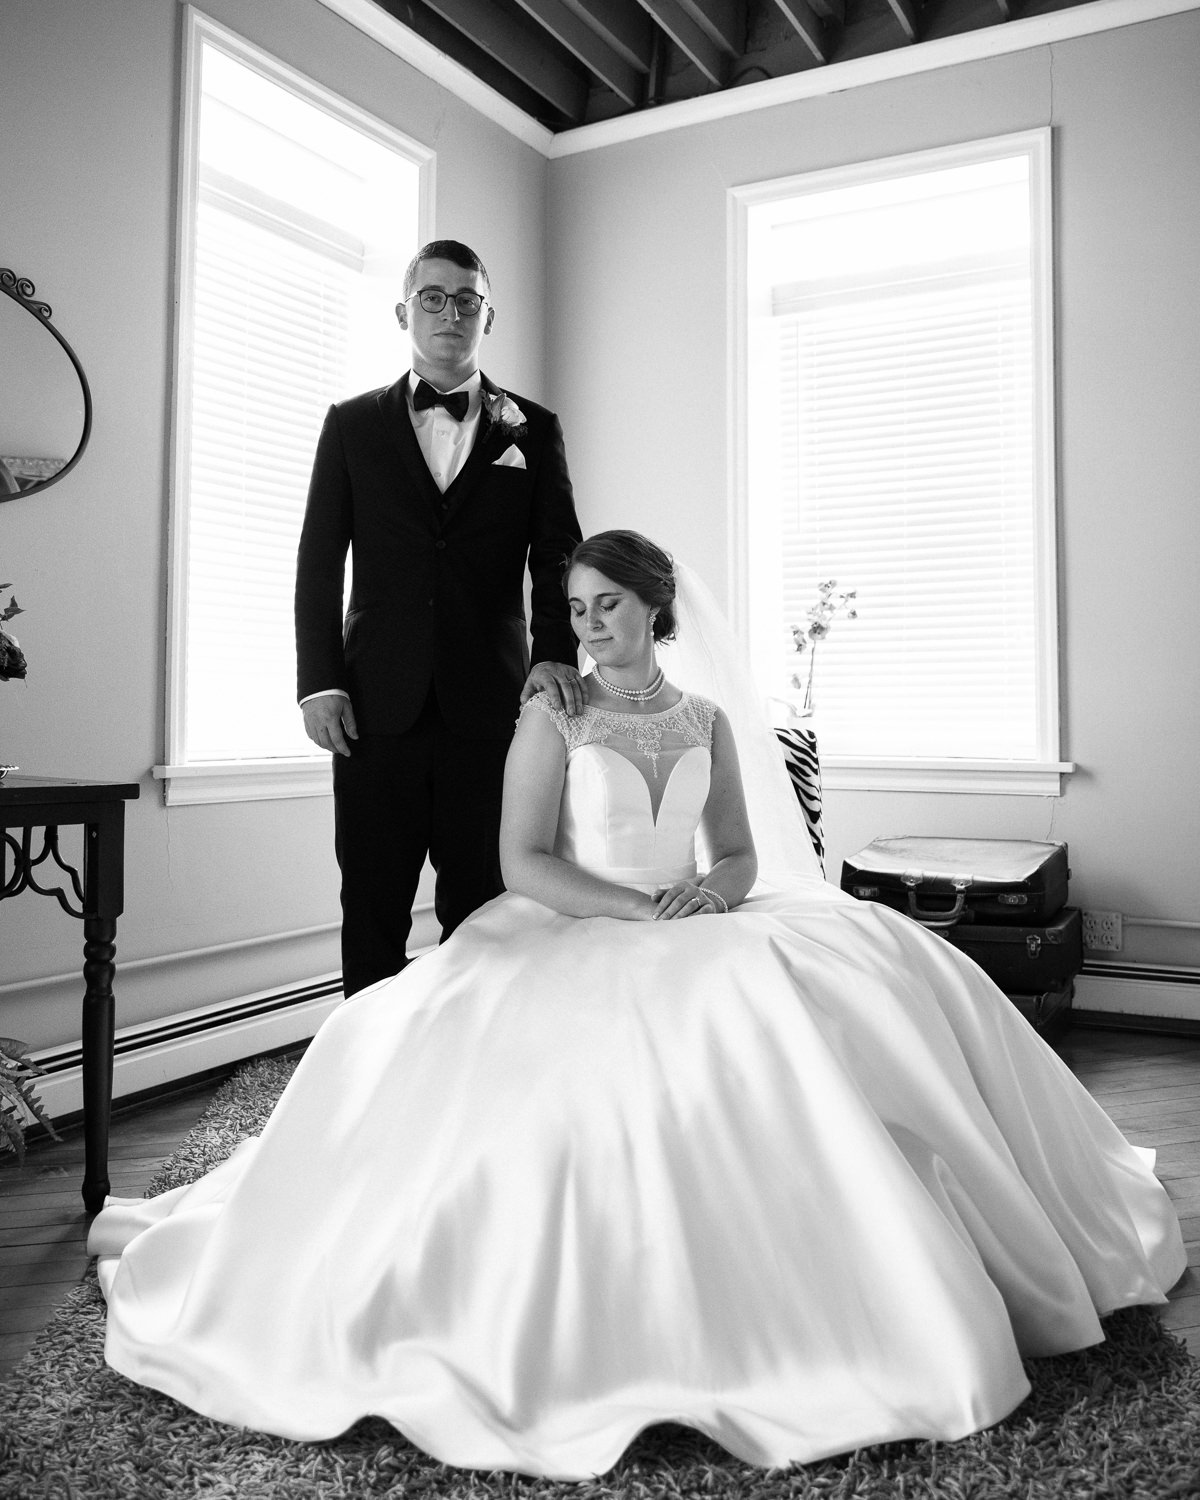 Grant Beachy photographpy wedding editorial fitness architecture goshen chicago south bend -039.jpg